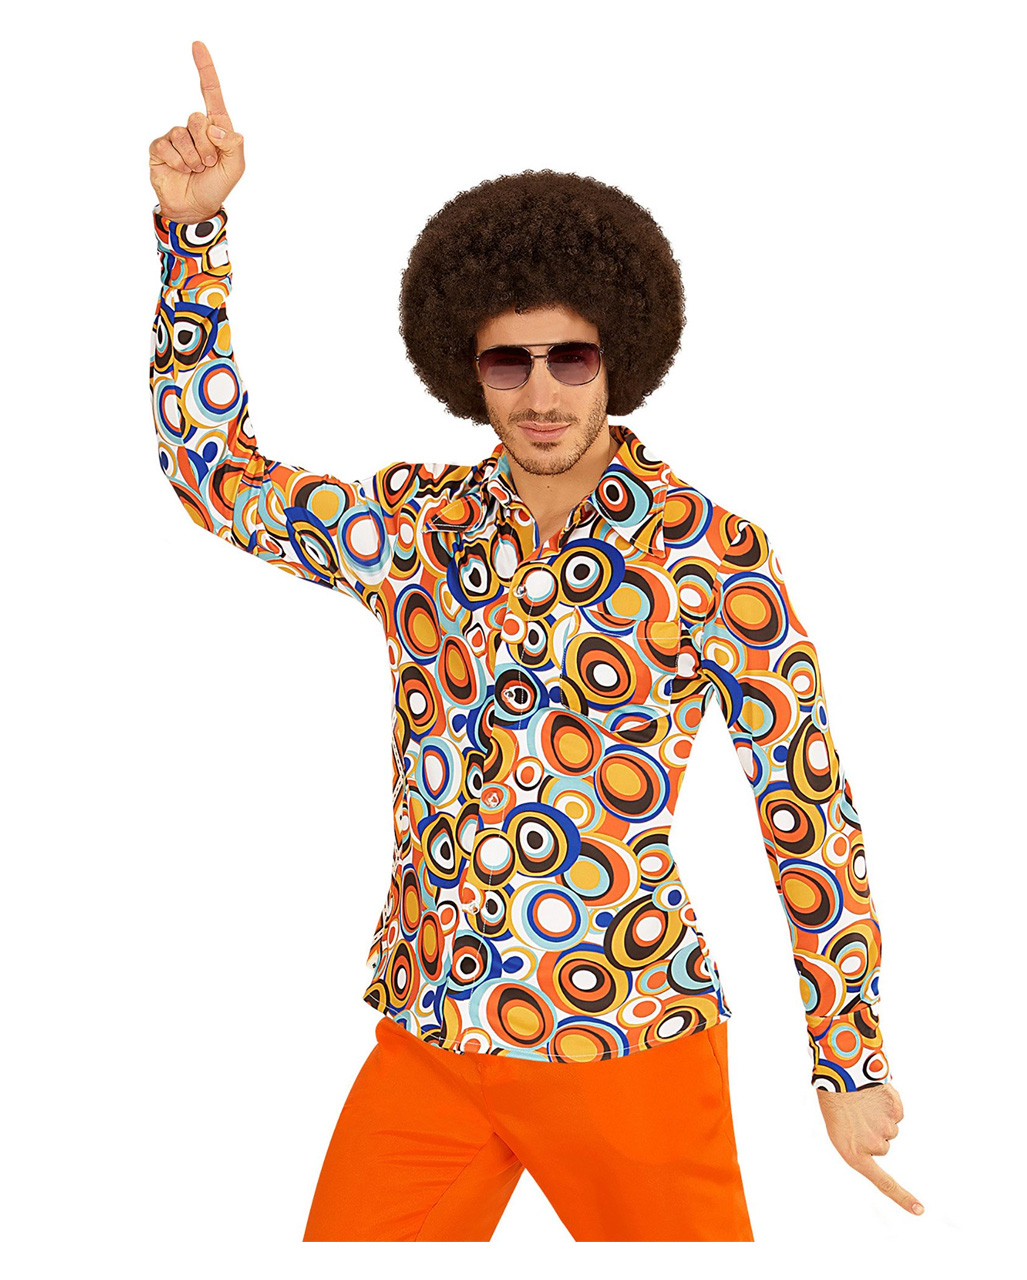 GROOVY DISCO SHIRT BLACK AFRO WIG 1970S ADULT MENS COSTUME